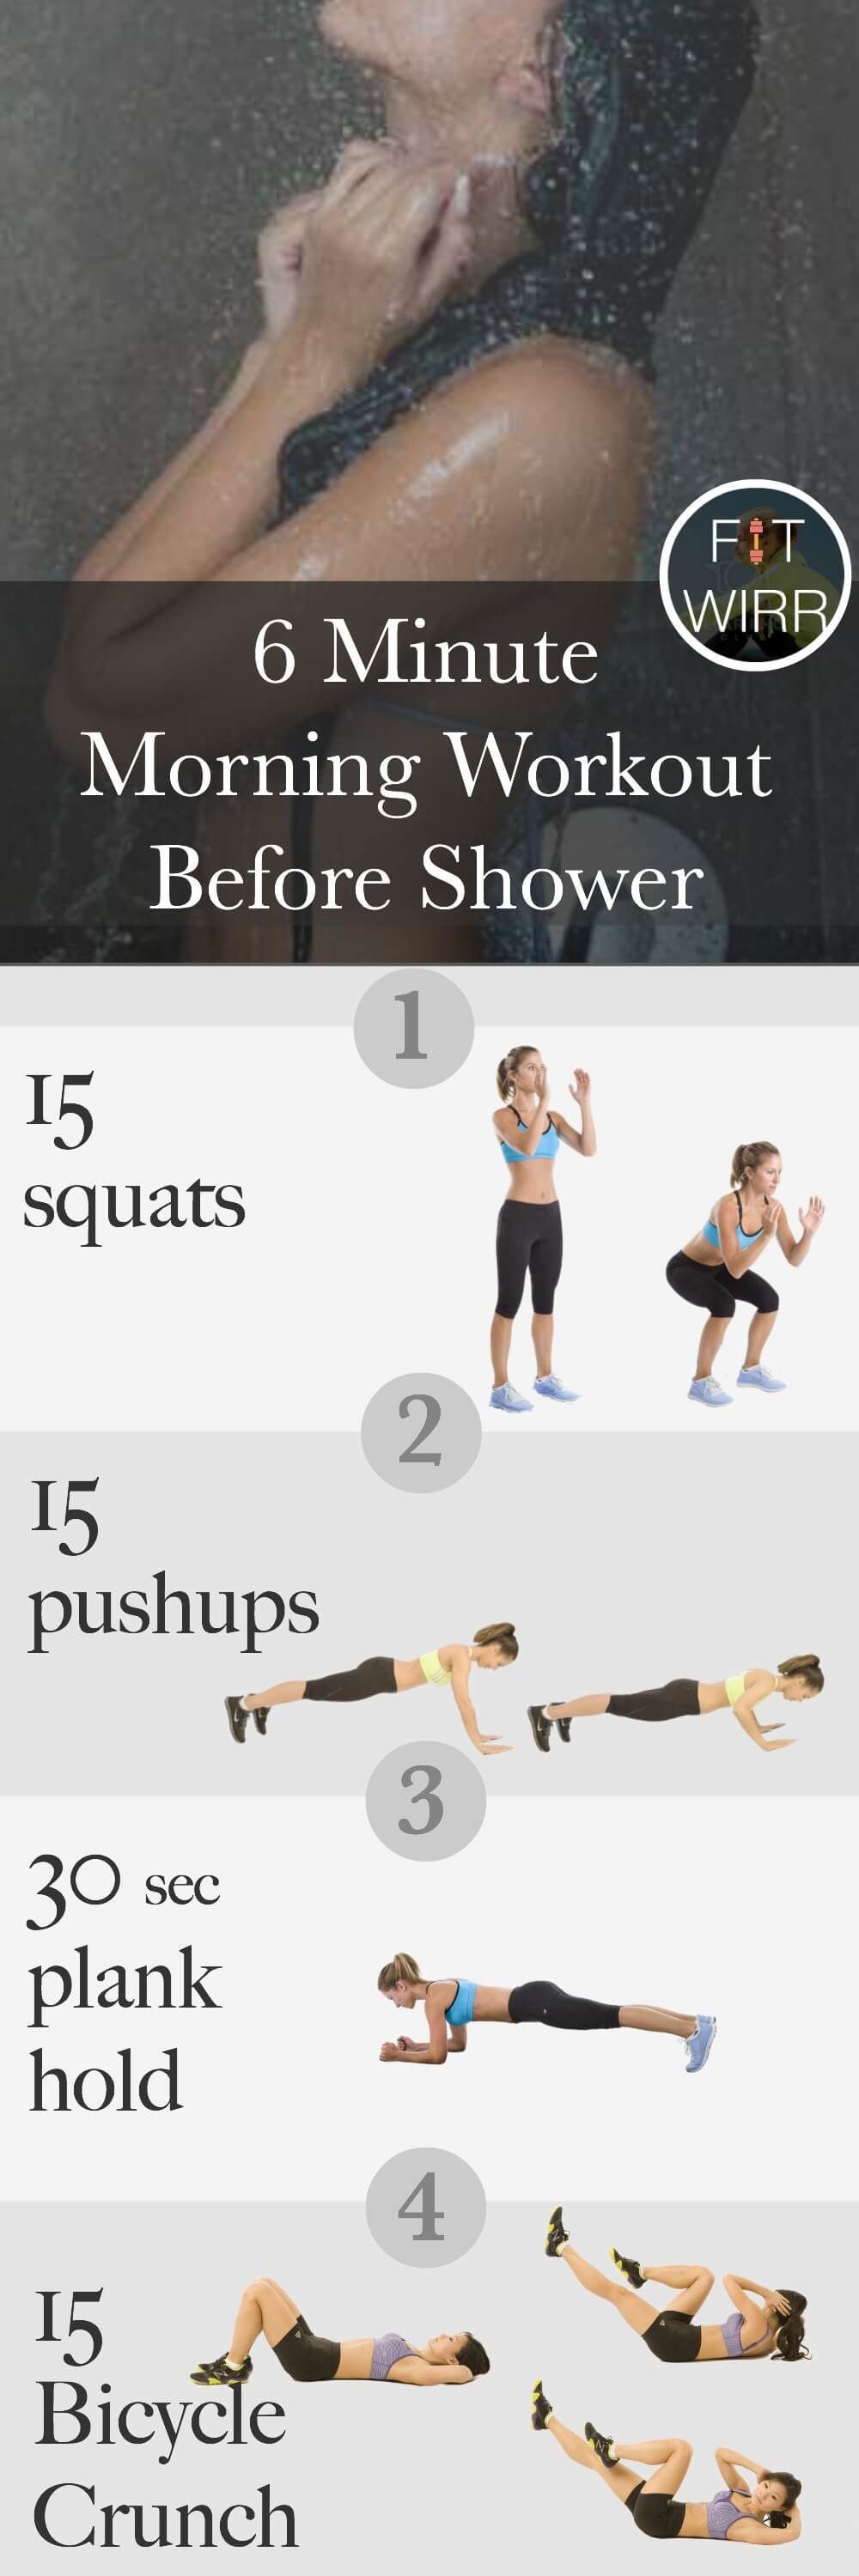 Crush calories and incinerate fat with this 6 minute morning workout routine. Do this short yet intense workout before your